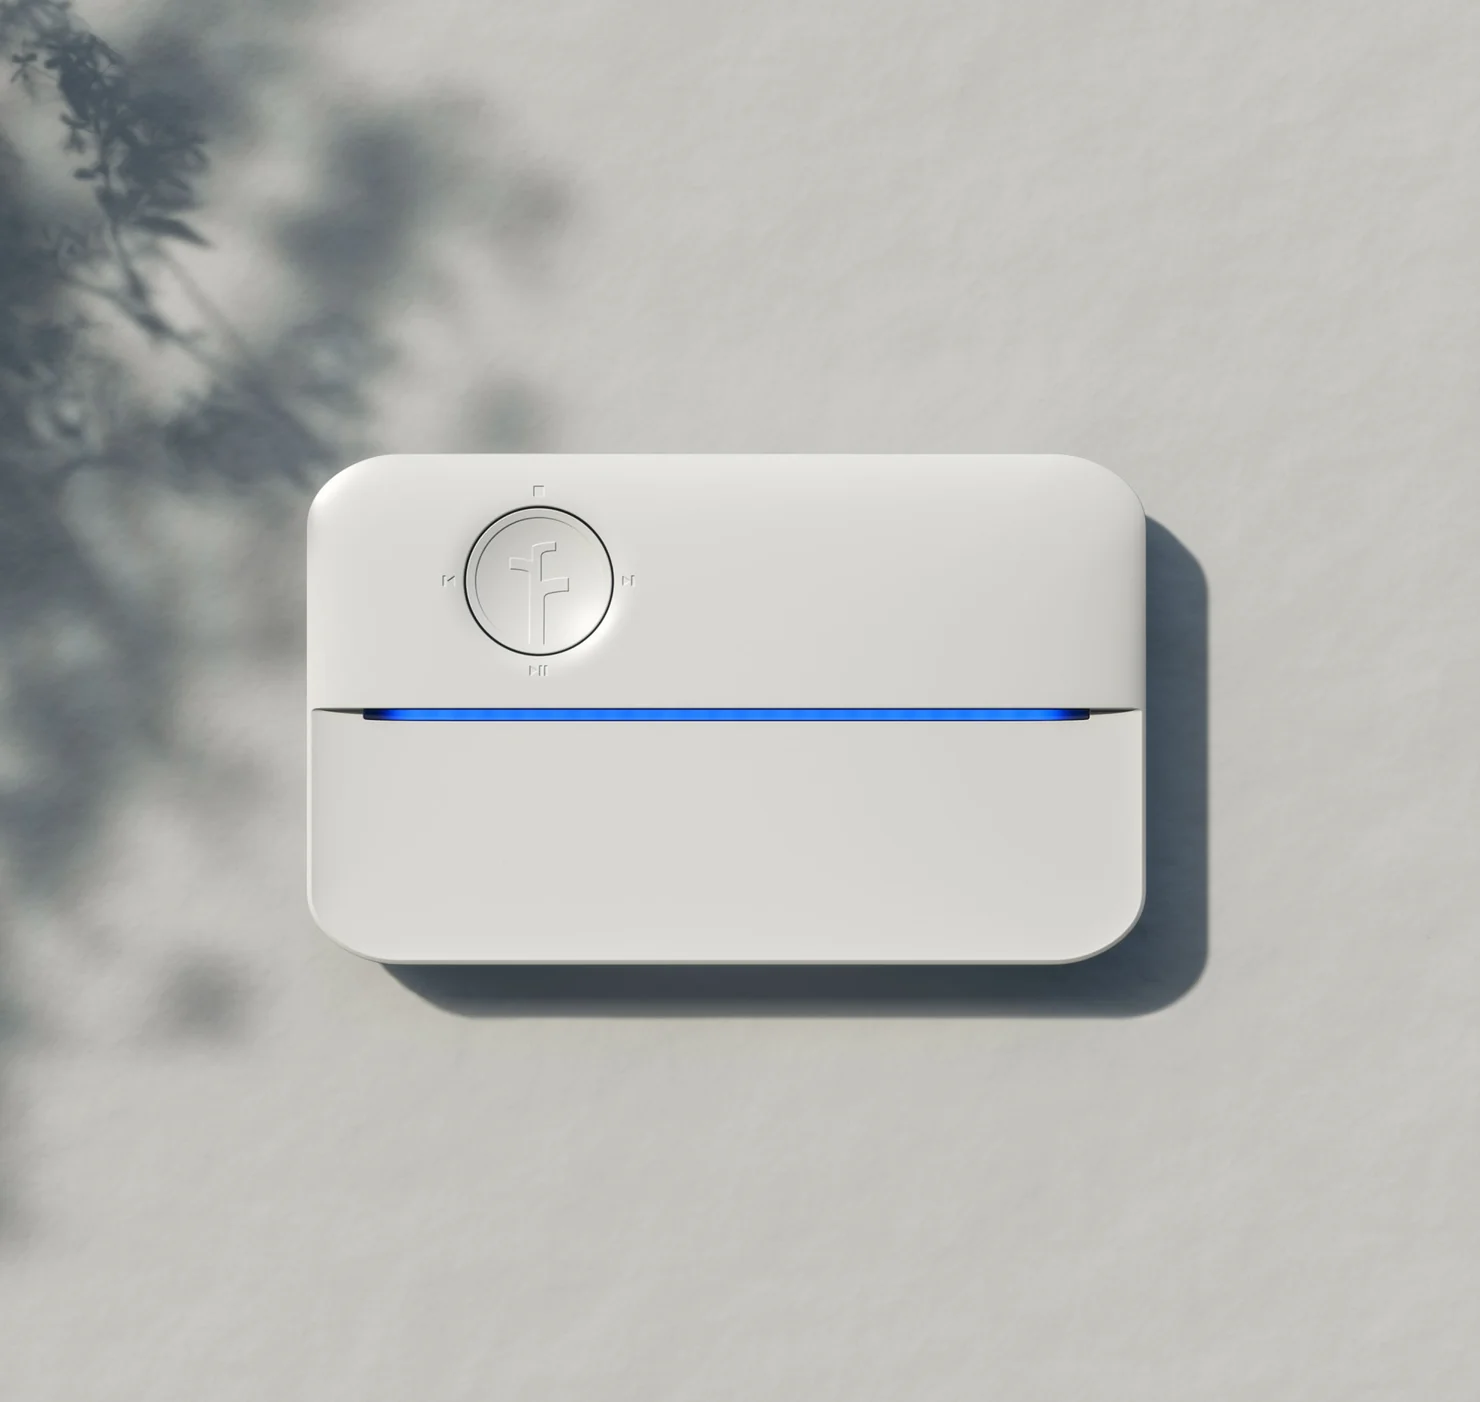 Rachio 3 Sprinkler controller for smart irrigation watering of your lawn